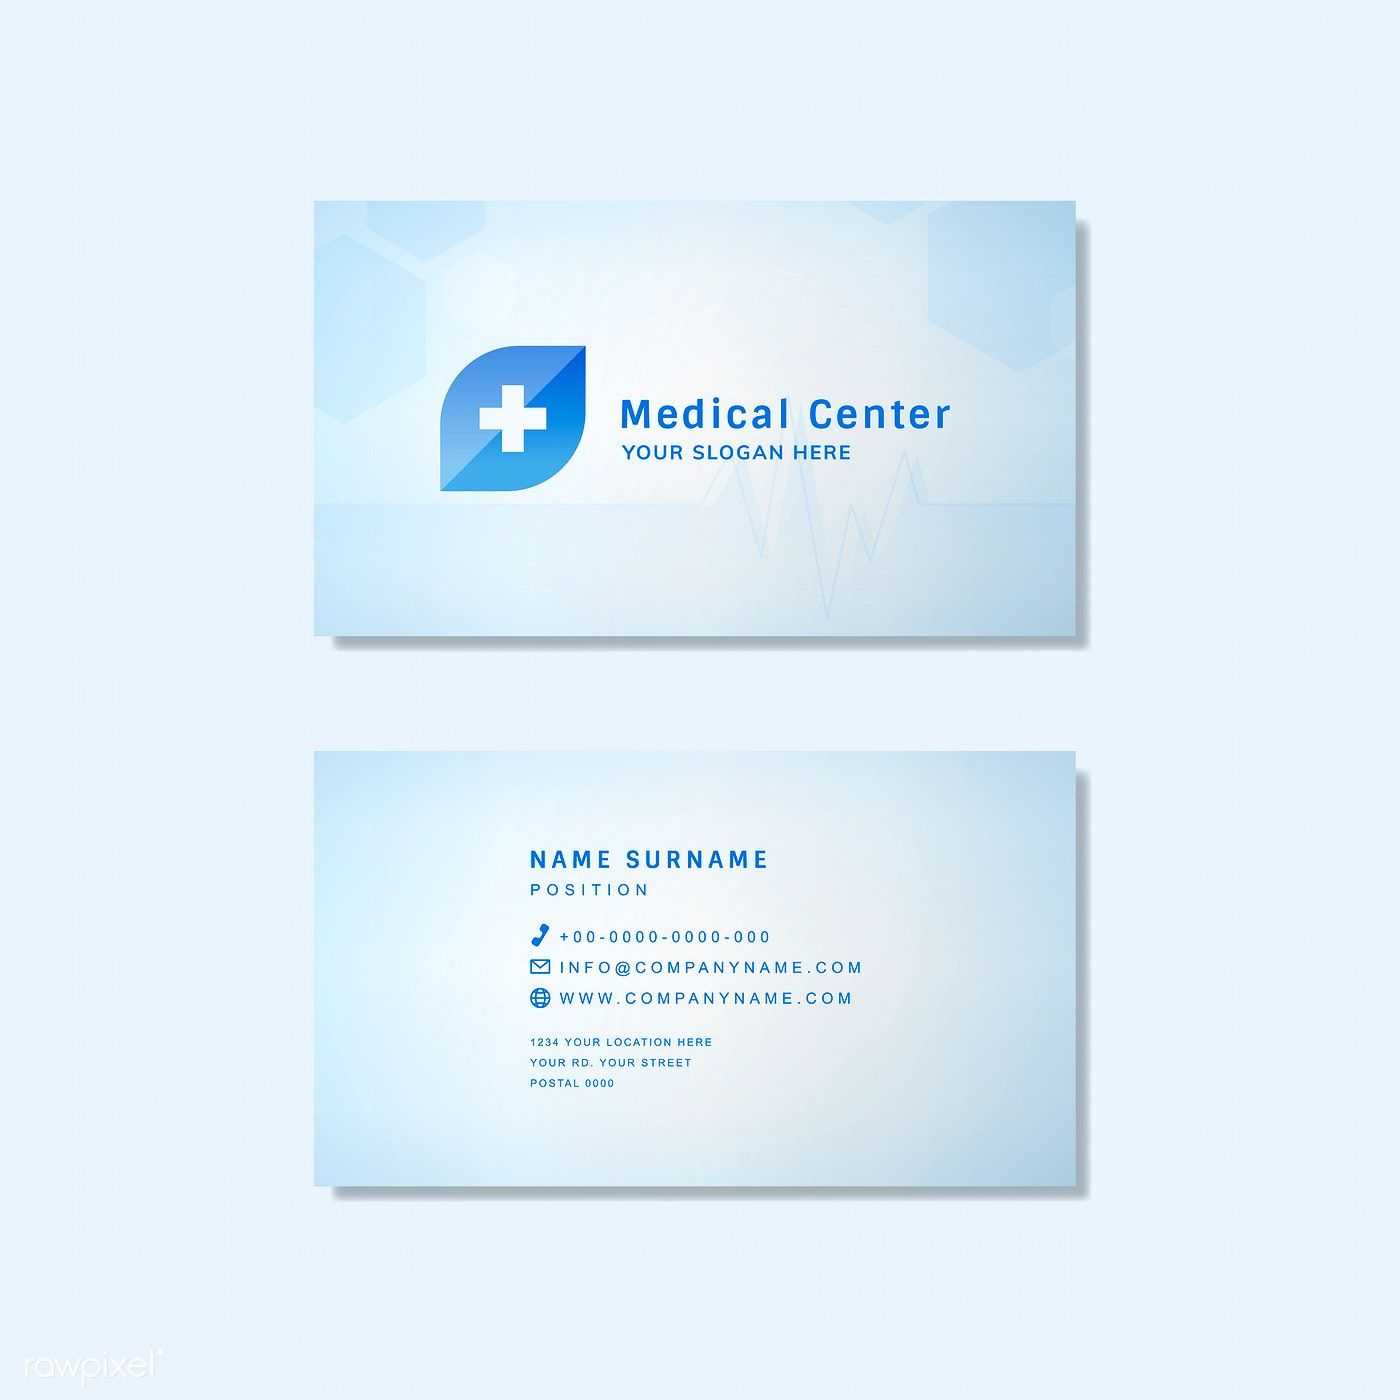 Medical Professional Business Card Design Mockup | Free Throughout Medical Business Cards Templates Free